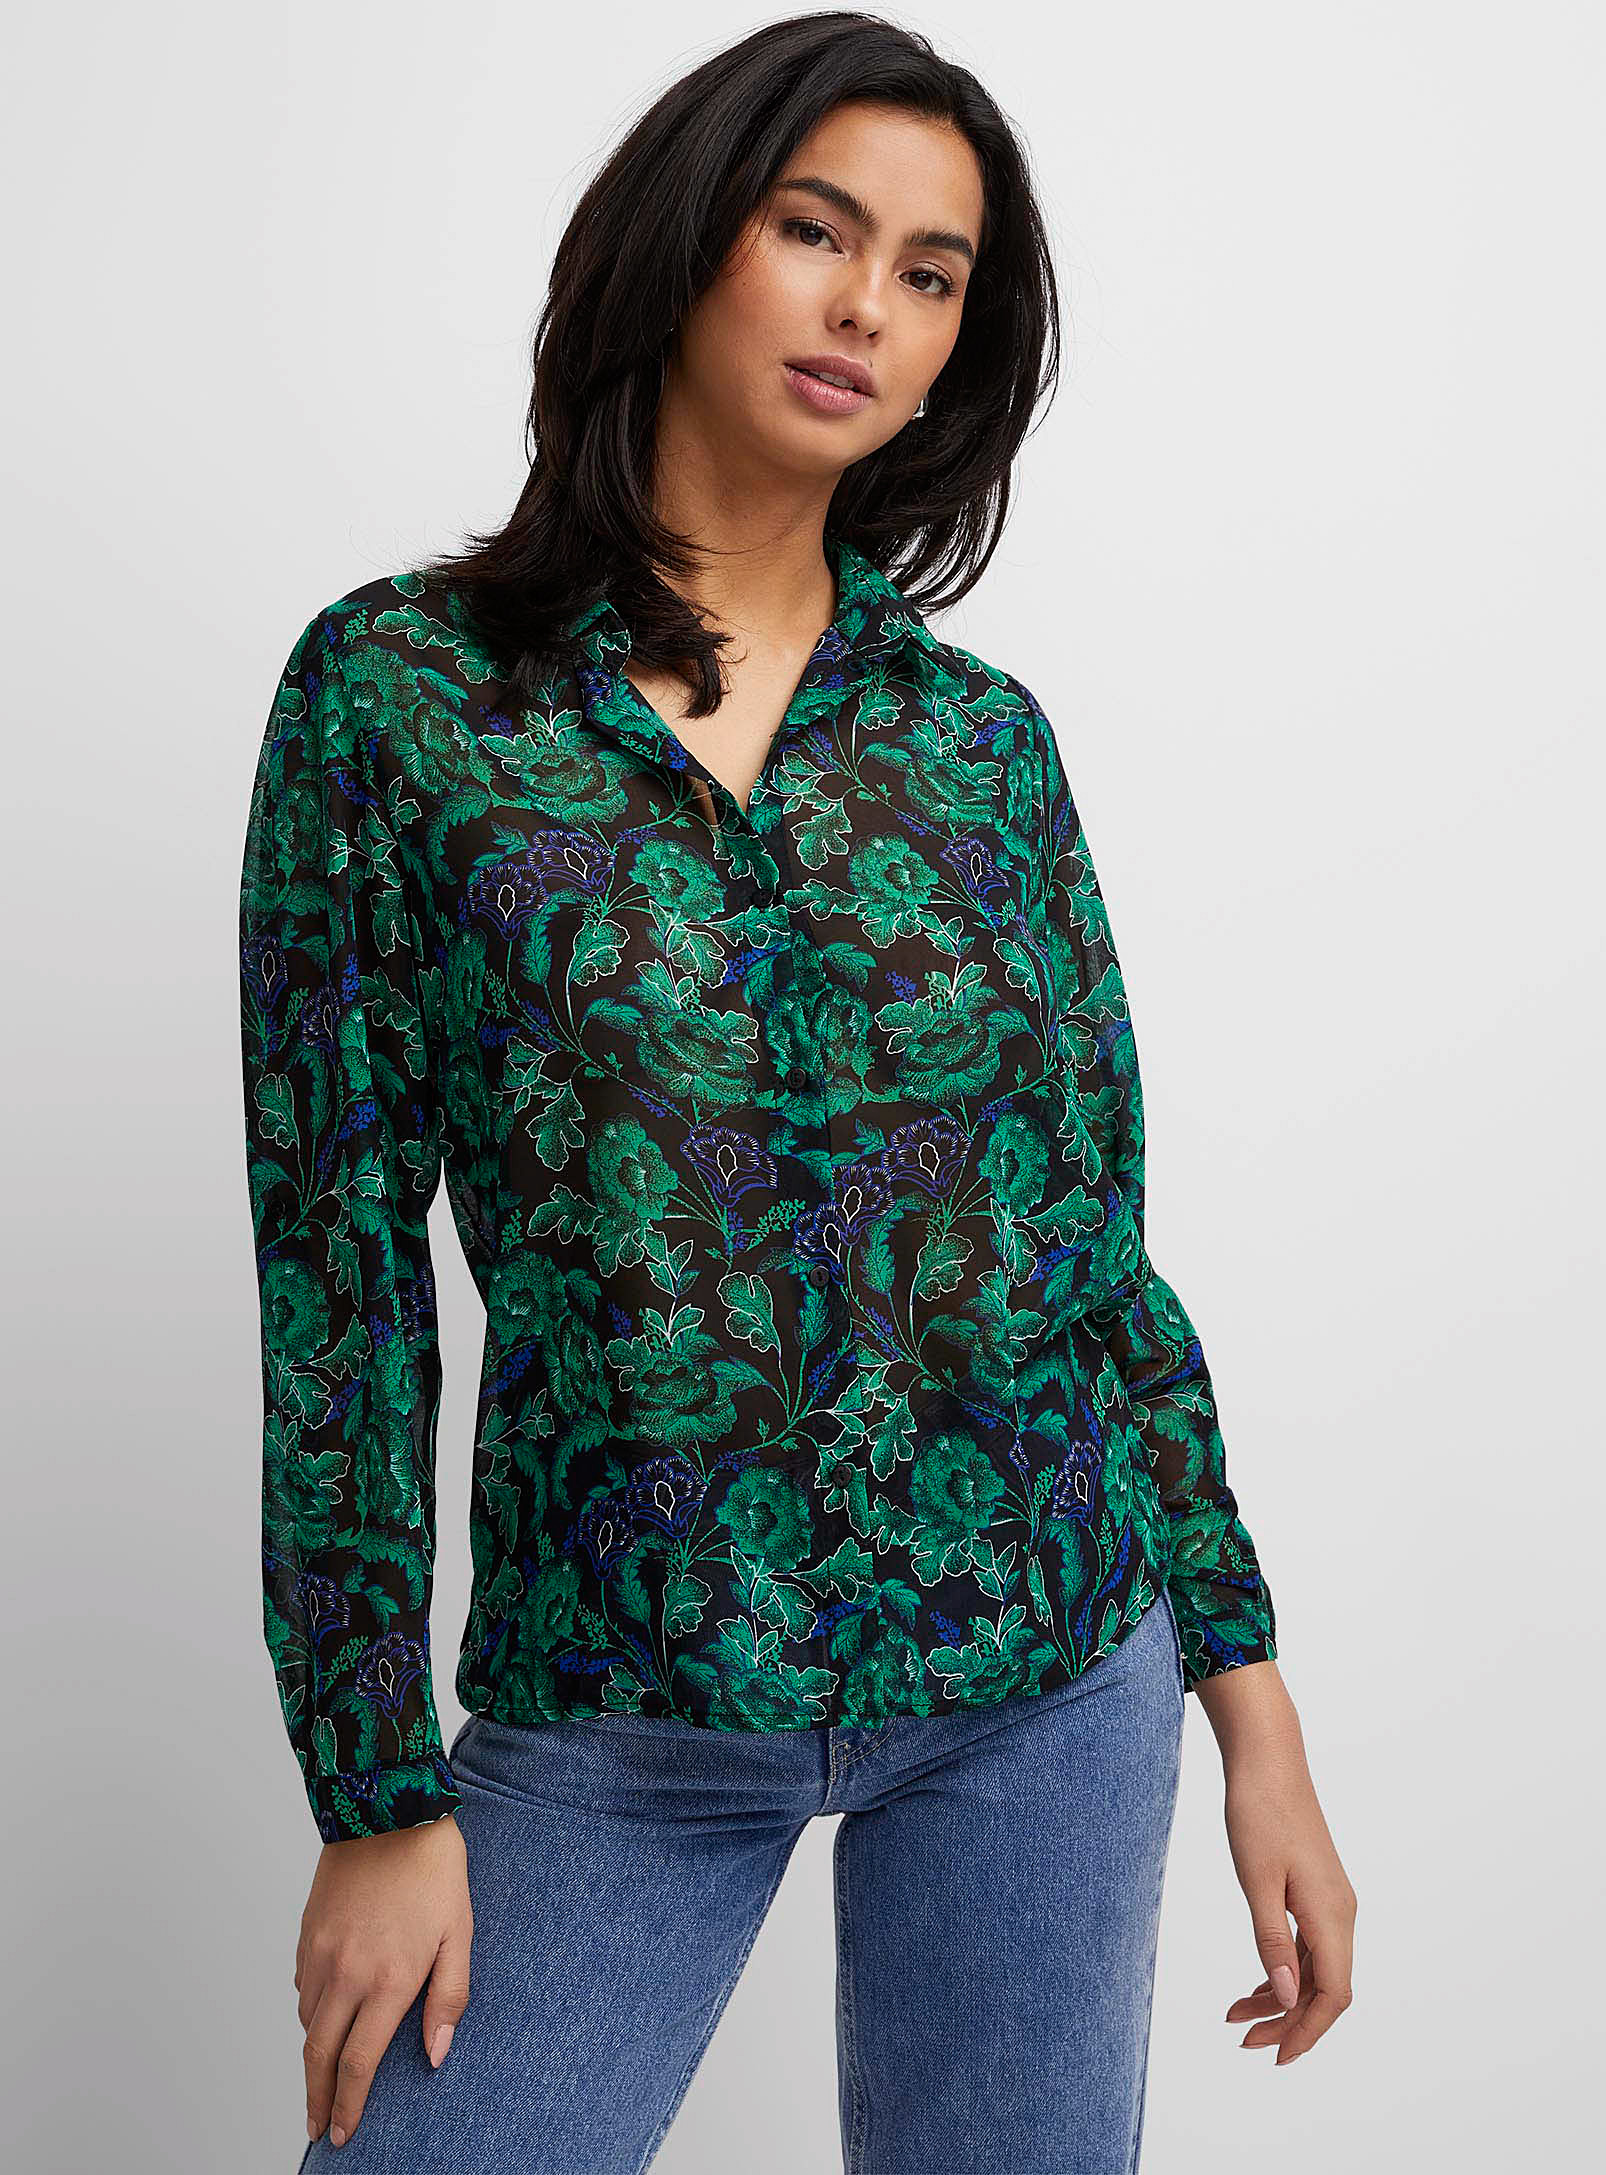 Icone Sheer Chiffon Printed Blouse In Patterned Green